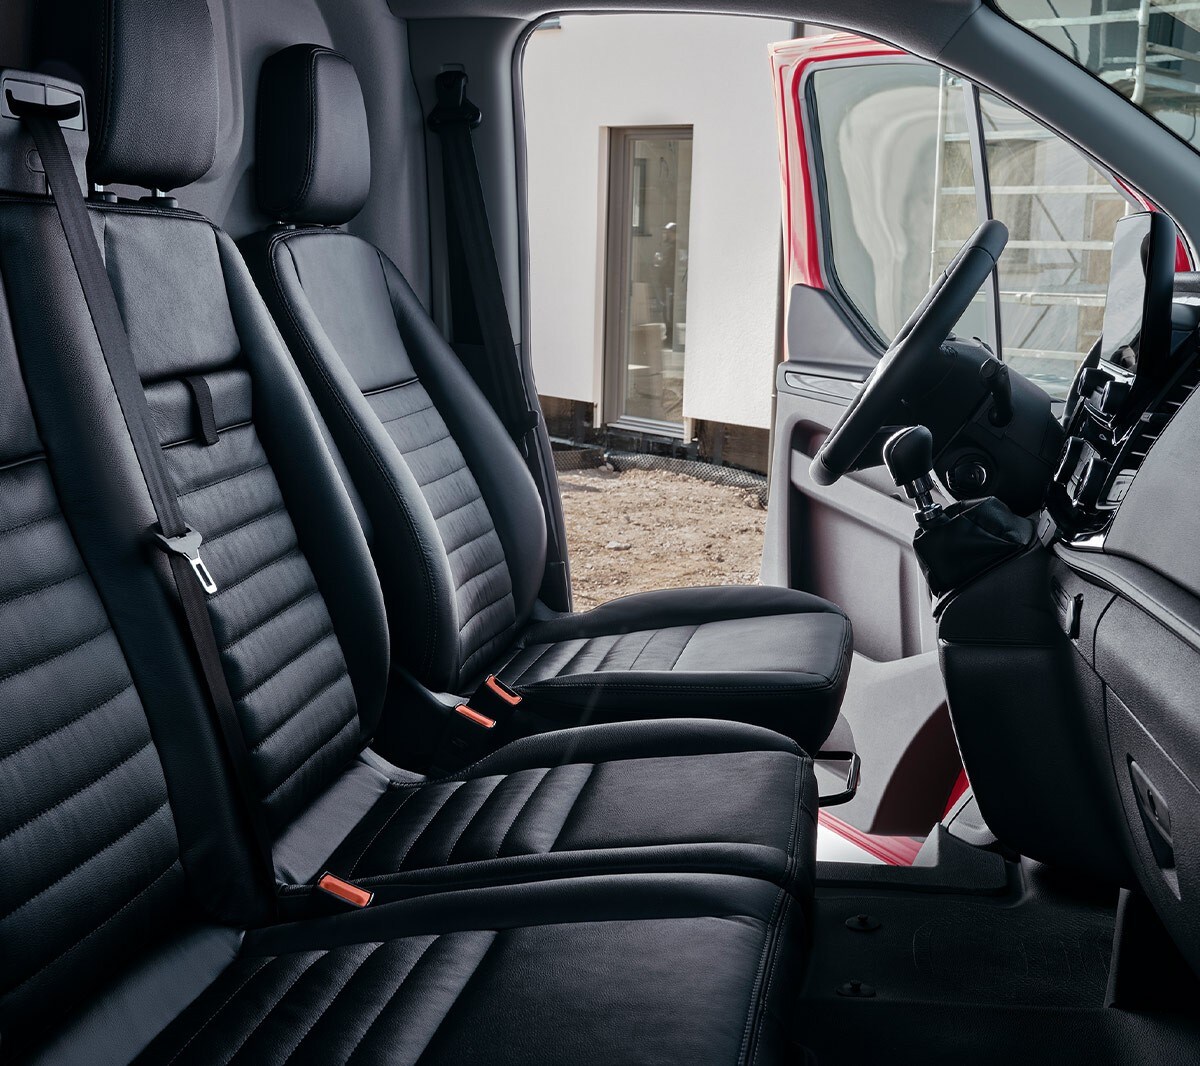 New Ford Transit Custom Trail interior with front seats, dashboard and steering wheel